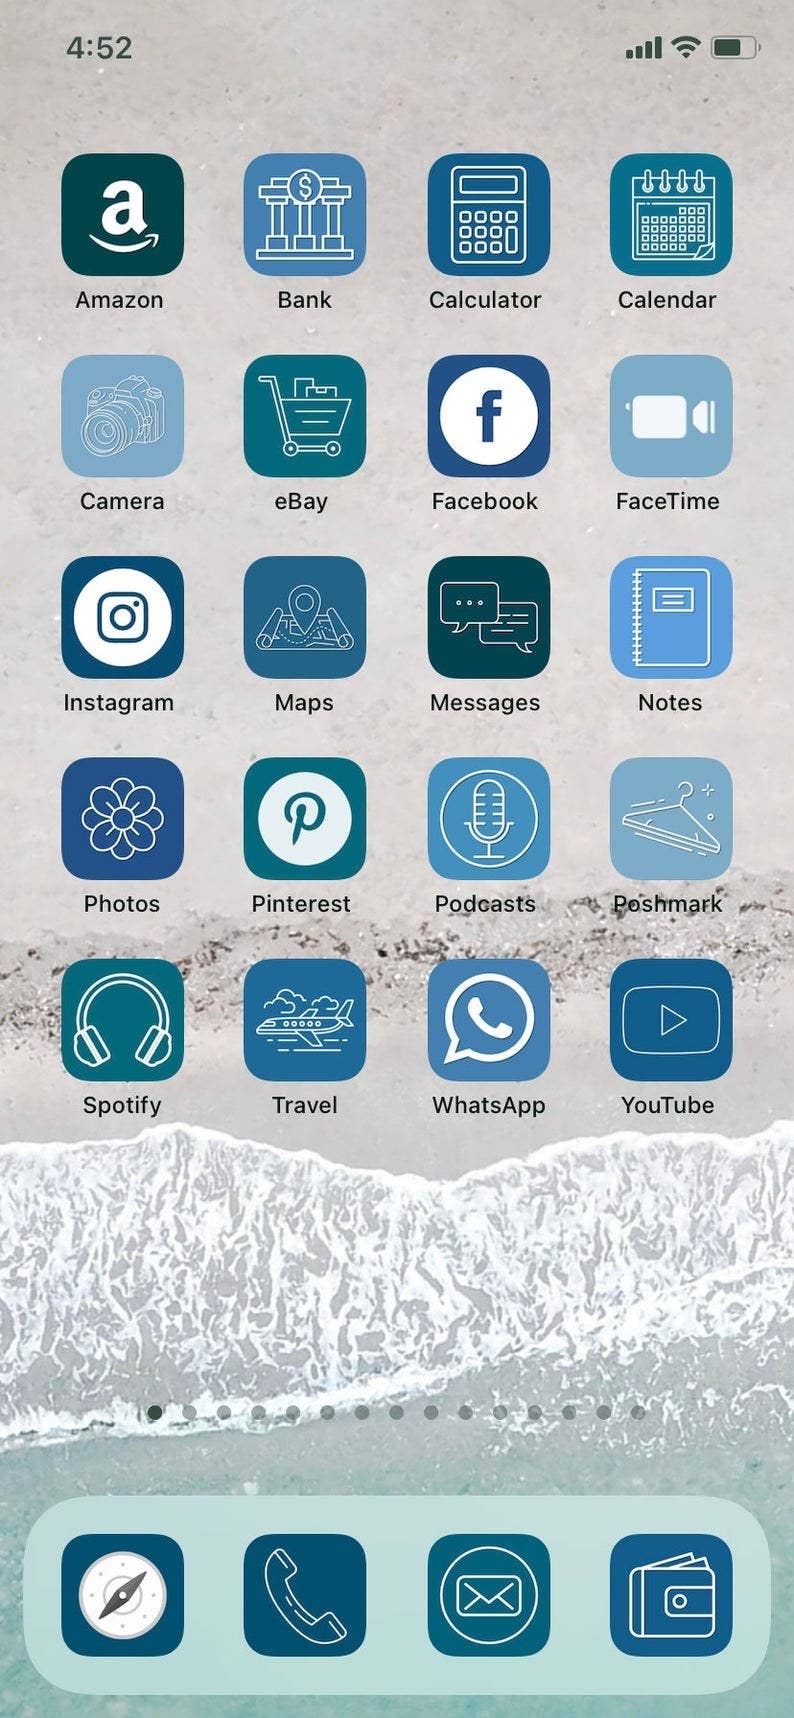 Ios14 Aesthetic App Icon Themes Light blue mail icon mail icon ios app icon iphone icon. ios14 aesthetic app icon themes